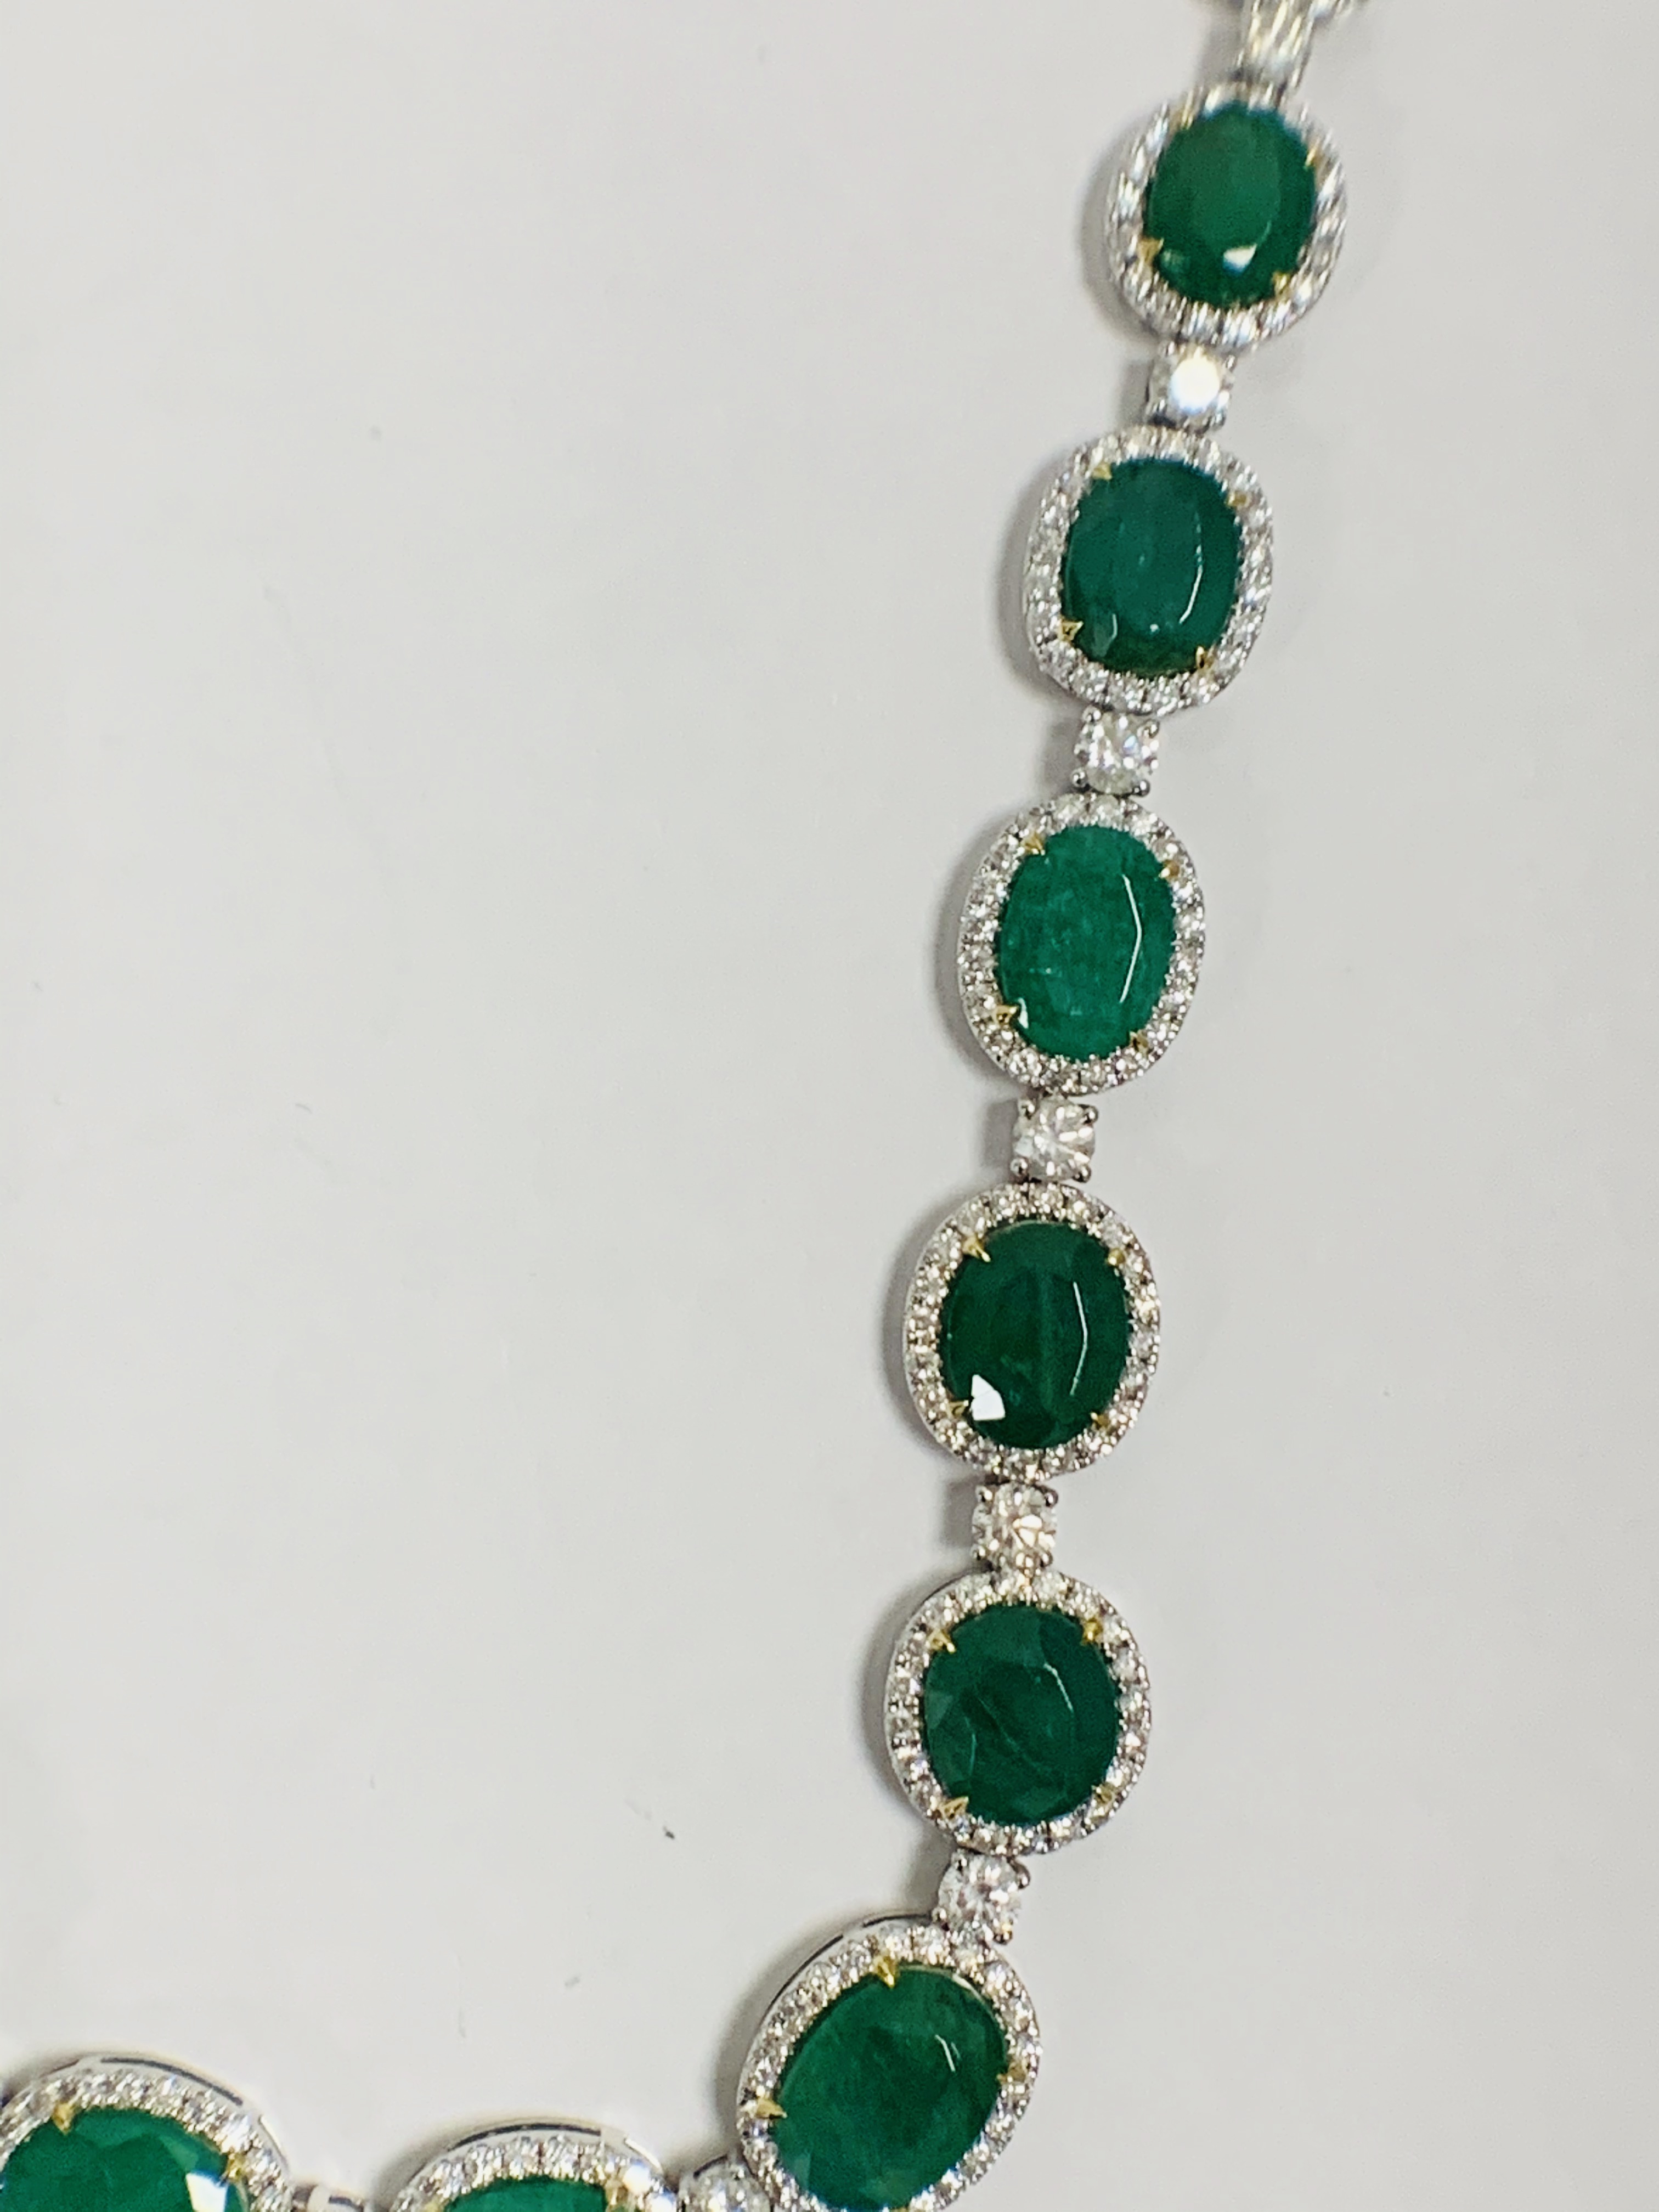 Platinum and Yellow Gold Emerald and Diamond necklace featuring, 29 oval cut, light to deep green Em - Image 7 of 36